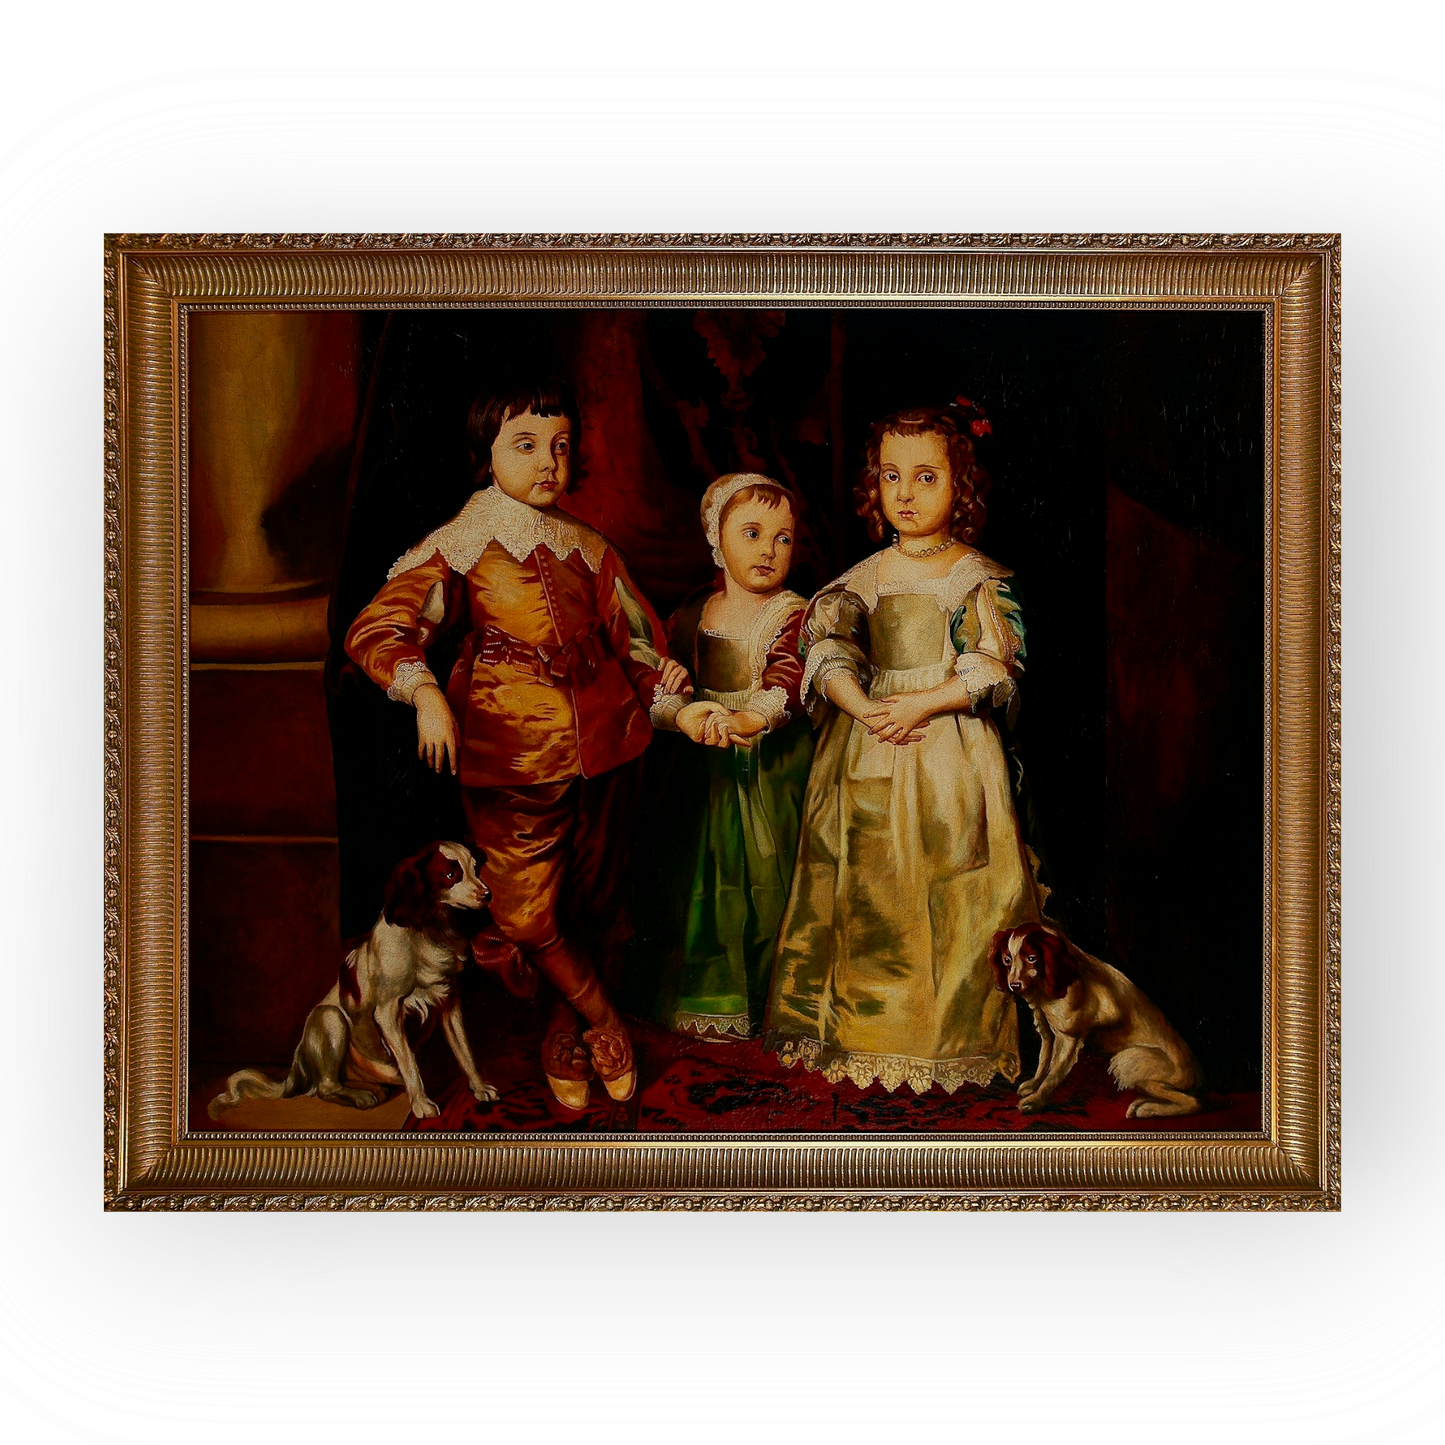 Follower of Van Dyck (1599-1641) - Early 19th Century English School Antique Oil On Canvas Portrait, In The 17th Century Manner, of The Three Eldest Children of King Charles I